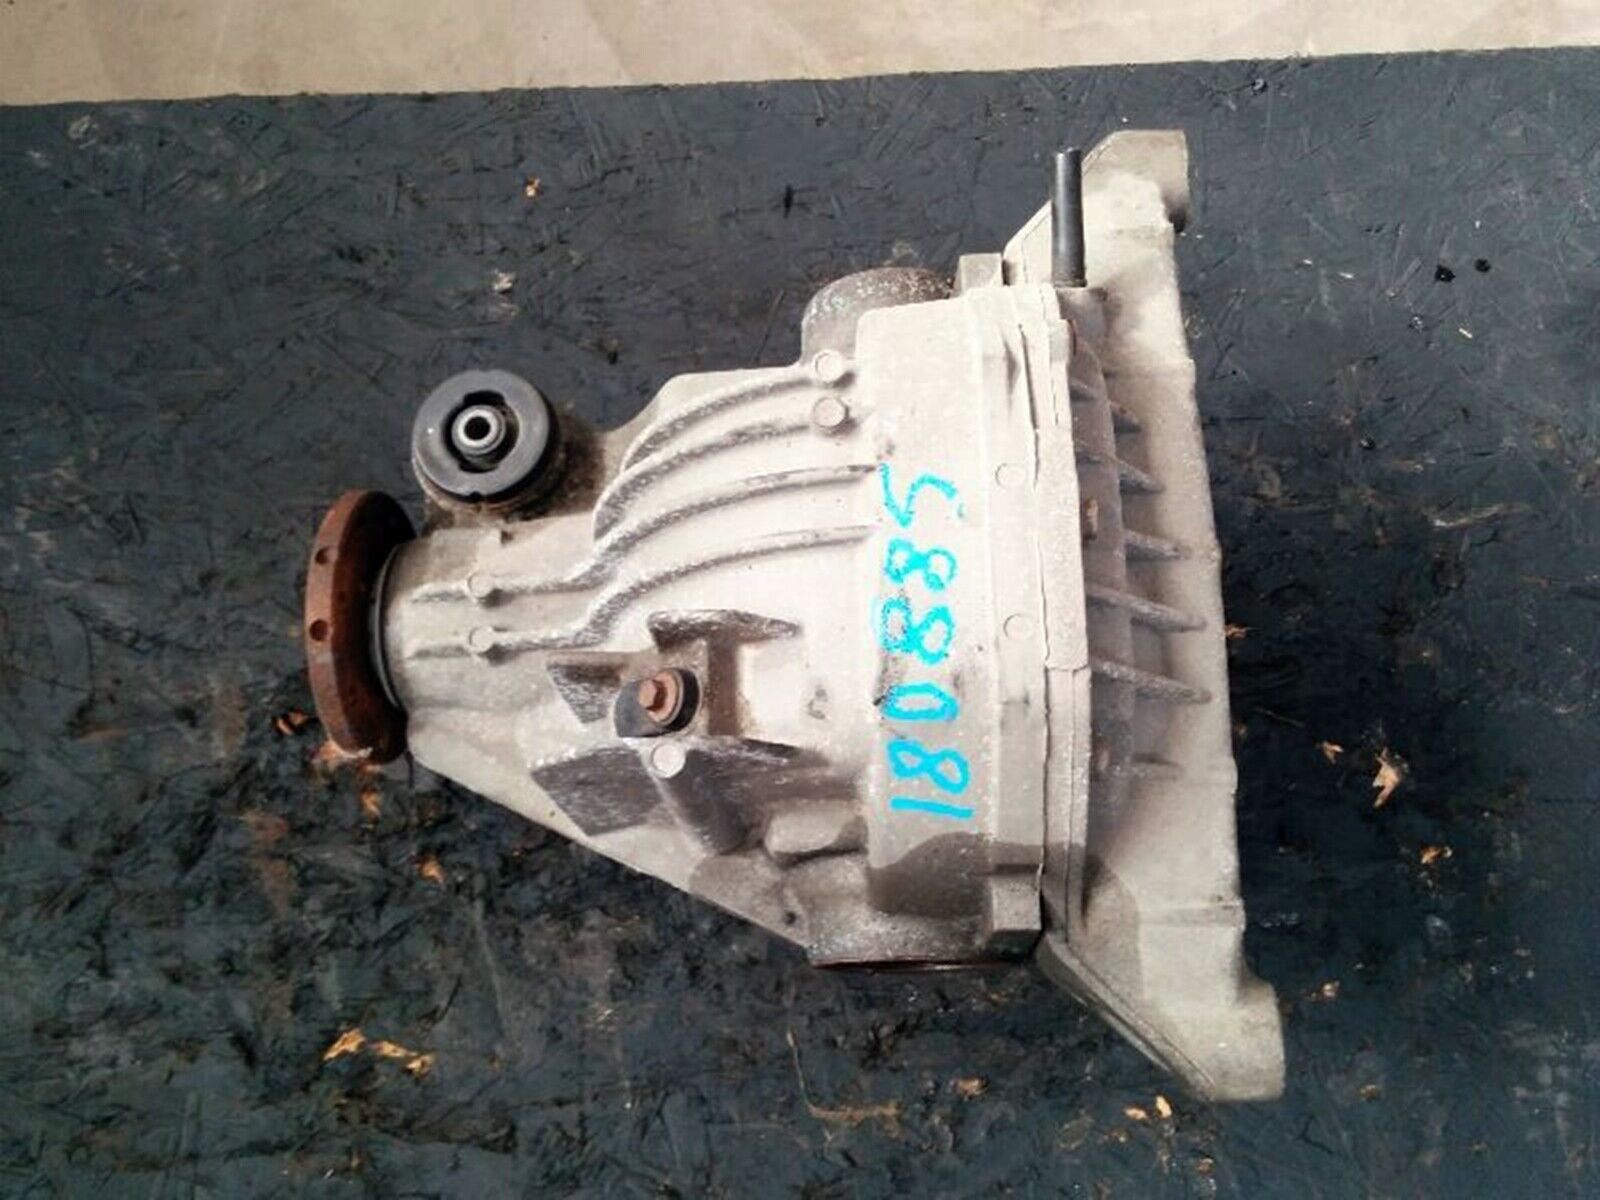 Used 2003-2005 Ford Explorer Rear Axle Differential Carrier 3.73 Ratio 2003 Ford Explorer Rear Differential Fluid Change